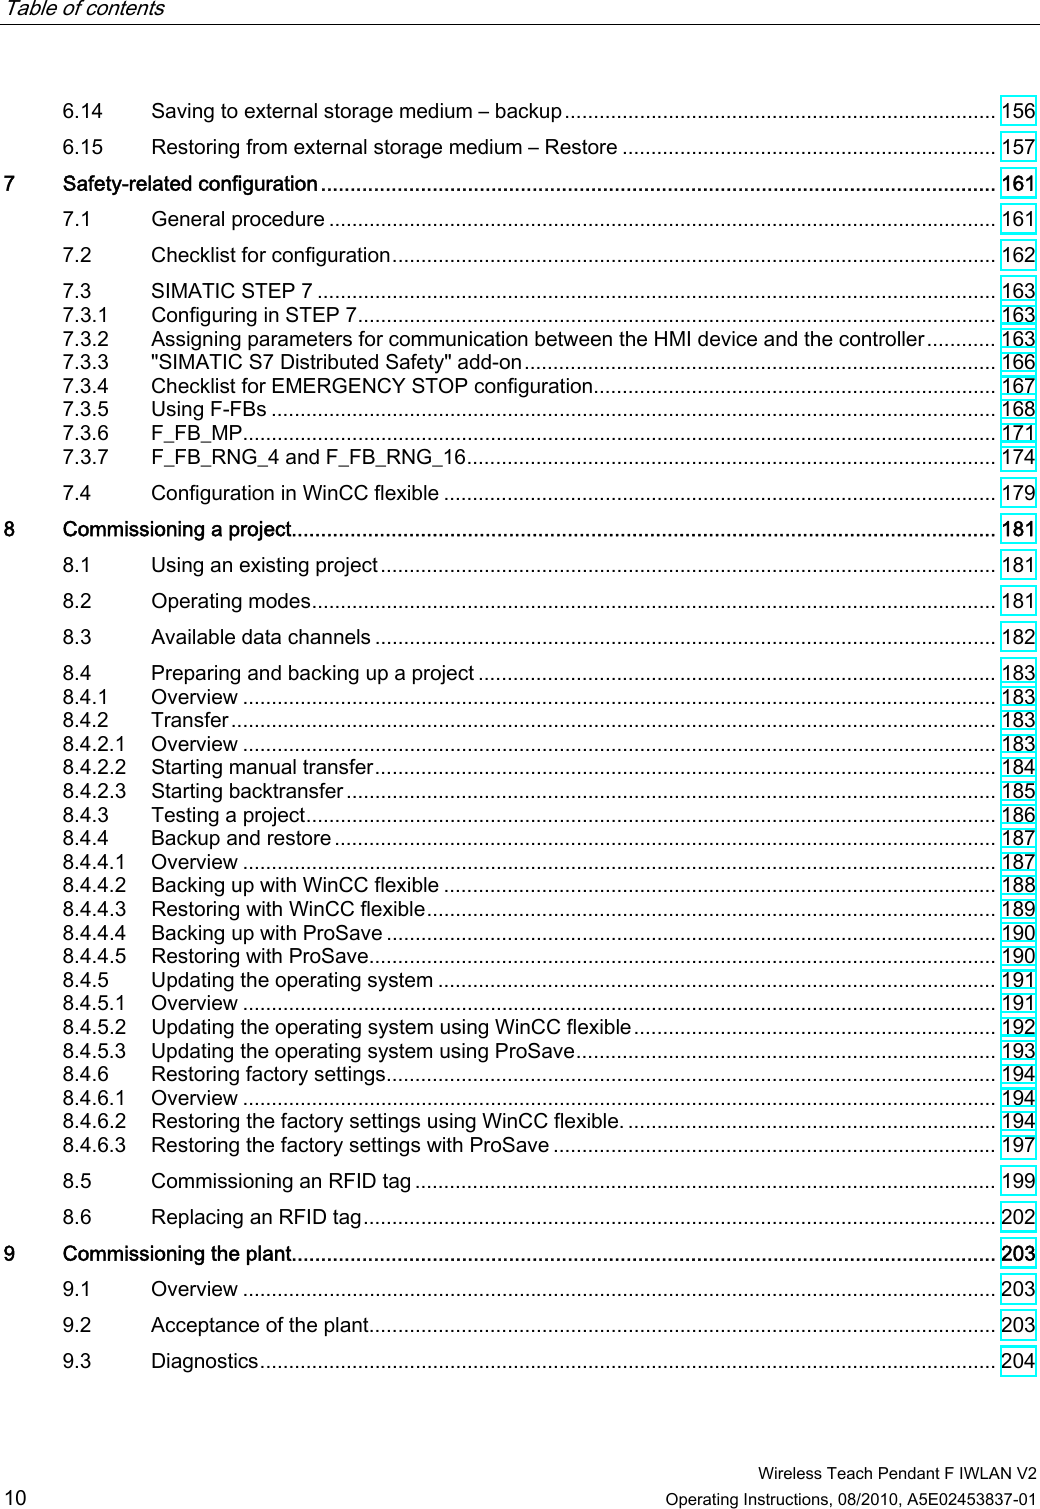 Table of contents      Wireless Teach Pendant F IWLAN V2 10 Operating Instructions, 08/2010, A5E02453837-01 6.14  Saving to external storage medium – backup........................................................................... 156 6.15  Restoring from external storage medium – Restore ................................................................. 157 7  Safety-related configuration................................................................................................................... 161 7.1  General procedure .................................................................................................................... 161 7.2  Checklist for configuration......................................................................................................... 162 7.3  SIMATIC STEP 7 ...................................................................................................................... 163 7.3.1  Configuring in STEP 7............................................................................................................... 163 7.3.2  Assigning parameters for communication between the HMI device and the controller............ 163 7.3.3  &quot;SIMATIC S7 Distributed Safety&quot; add-on.................................................................................. 166 7.3.4  Checklist for EMERGENCY STOP configuration...................................................................... 167 7.3.5  Using F-FBs .............................................................................................................................. 168 7.3.6  F_FB_MP................................................................................................................................... 171 7.3.7  F_FB_RNG_4 and F_FB_RNG_16............................................................................................ 174 7.4  Configuration in WinCC flexible ................................................................................................ 179 8  Commissioning a project........................................................................................................................ 181 8.1  Using an existing project........................................................................................................... 181 8.2  Operating modes....................................................................................................................... 181 8.3  Available data channels ............................................................................................................ 182 8.4  Preparing and backing up a project .......................................................................................... 183 8.4.1  Overview ................................................................................................................................... 183 8.4.2  Transfer..................................................................................................................................... 183 8.4.2.1  Overview ................................................................................................................................... 183 8.4.2.2  Starting manual transfer............................................................................................................ 184 8.4.2.3  Starting backtransfer................................................................................................................. 185 8.4.3  Testing a project........................................................................................................................ 186 8.4.4  Backup and restore ................................................................................................................... 187 8.4.4.1  Overview ................................................................................................................................... 187 8.4.4.2  Backing up with WinCC flexible ................................................................................................ 188 8.4.4.3  Restoring with WinCC flexible................................................................................................... 189 8.4.4.4  Backing up with ProSave .......................................................................................................... 190 8.4.4.5  Restoring with ProSave............................................................................................................. 190 8.4.5  Updating the operating system ................................................................................................. 191 8.4.5.1  Overview ................................................................................................................................... 191 8.4.5.2  Updating the operating system using WinCC flexible............................................................... 192 8.4.5.3  Updating the operating system using ProSave......................................................................... 193 8.4.6  Restoring factory settings.......................................................................................................... 194 8.4.6.1  Overview ................................................................................................................................... 194 8.4.6.2  Restoring the factory settings using WinCC flexible................................................................. 194 8.4.6.3  Restoring the factory settings with ProSave ............................................................................. 197 8.5  Commissioning an RFID tag ..................................................................................................... 199 8.6  Replacing an RFID tag.............................................................................................................. 202 9  Commissioning the plant........................................................................................................................ 203 9.1  Overview ................................................................................................................................... 203 9.2  Acceptance of the plant............................................................................................................. 203 9.3  Diagnostics................................................................................................................................ 204 PRELIMINARY II 1.7.2010